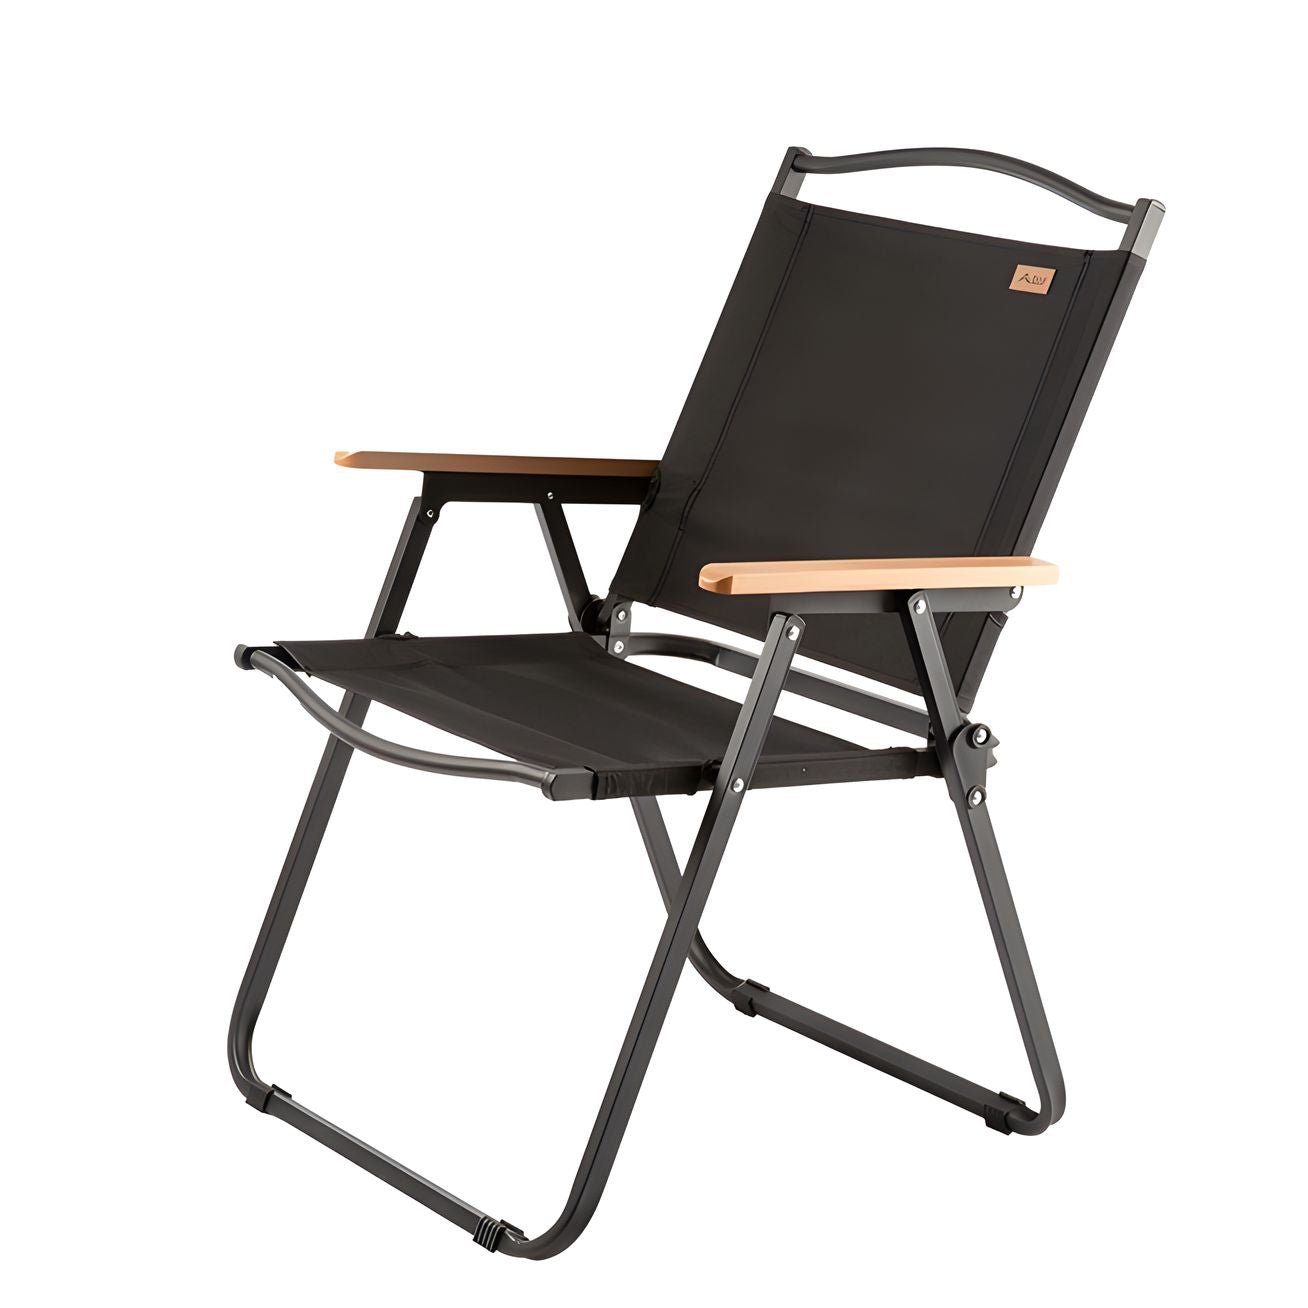 OUPES Portable Folding Camping Chair